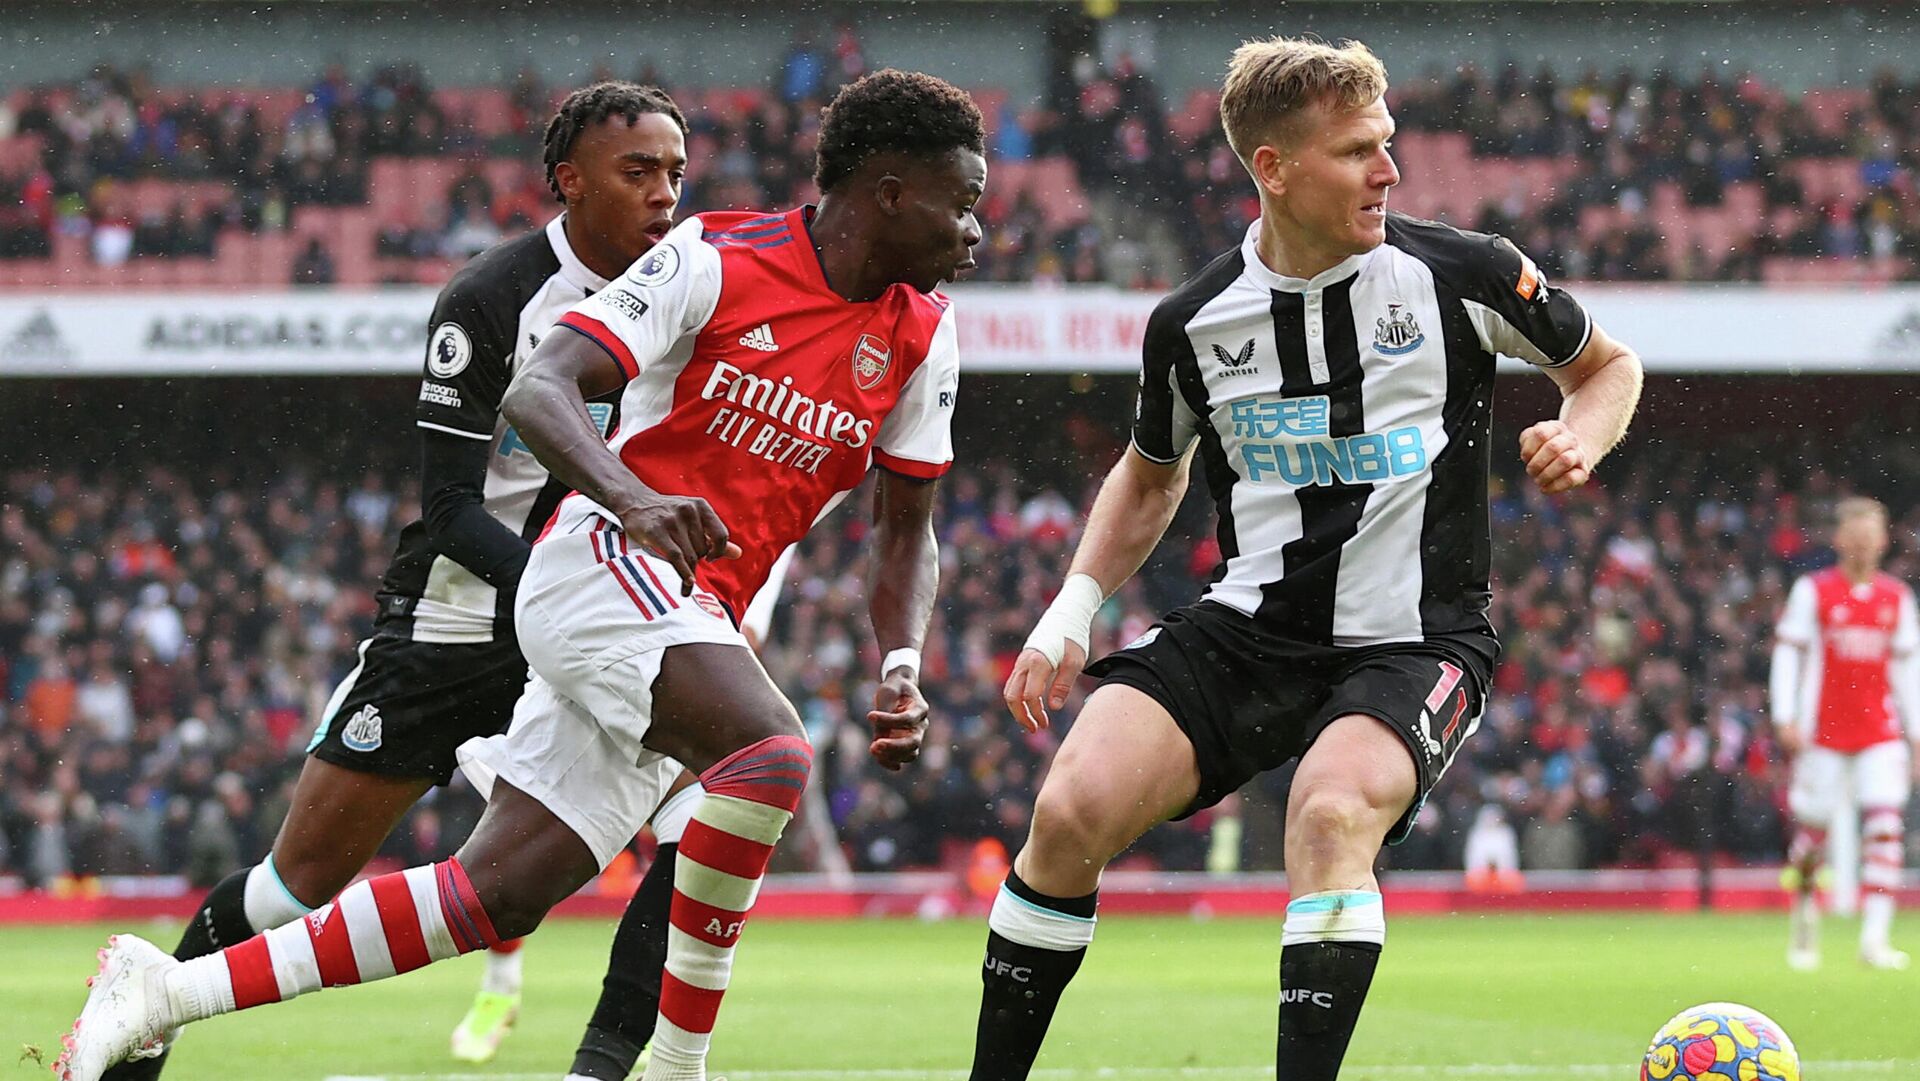 Arsenal's English midfielder Bukayo Saka (L) vies with Newcastle United's Scottish midfielder Matt Ritchie during the English Premier League football match between Arsenal and Newcastle United at the Emirates Stadium in London on November 27, 2021. (Photo by Adrian DENNIS / AFP) / RESTRICTED TO EDITORIAL USE. No use with unauthorized audio, video, data, fixture lists, club/league logos or 'live' services. Online in-match use limited to 120 images. An additional 40 images may be used in extra time. No video emulation. Social media in-match use limited to 120 images. An additional 40 images may be used in extra time. No use in betting publications, games or single club/league/player publications. /  - РИА Новости, 1920, 27.11.2021